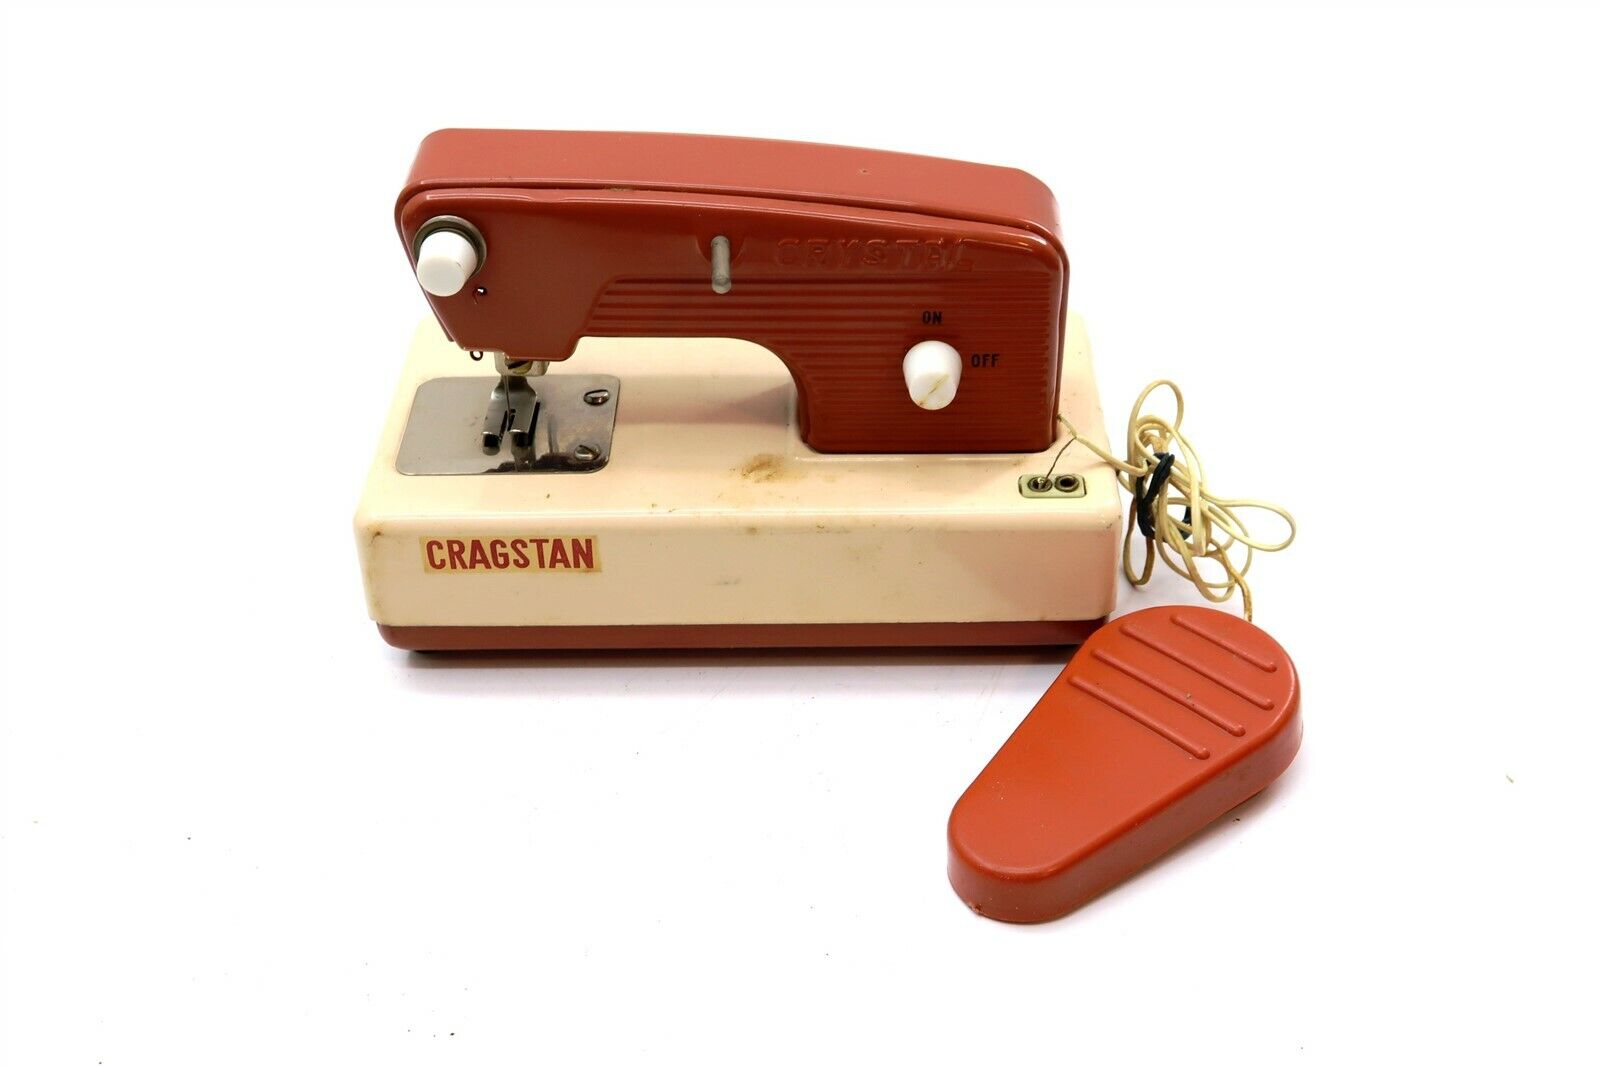 Vintage CRAGSTAN CRYSTAL Sewing Machine Toy / Miniature ~ Battery Operated Works